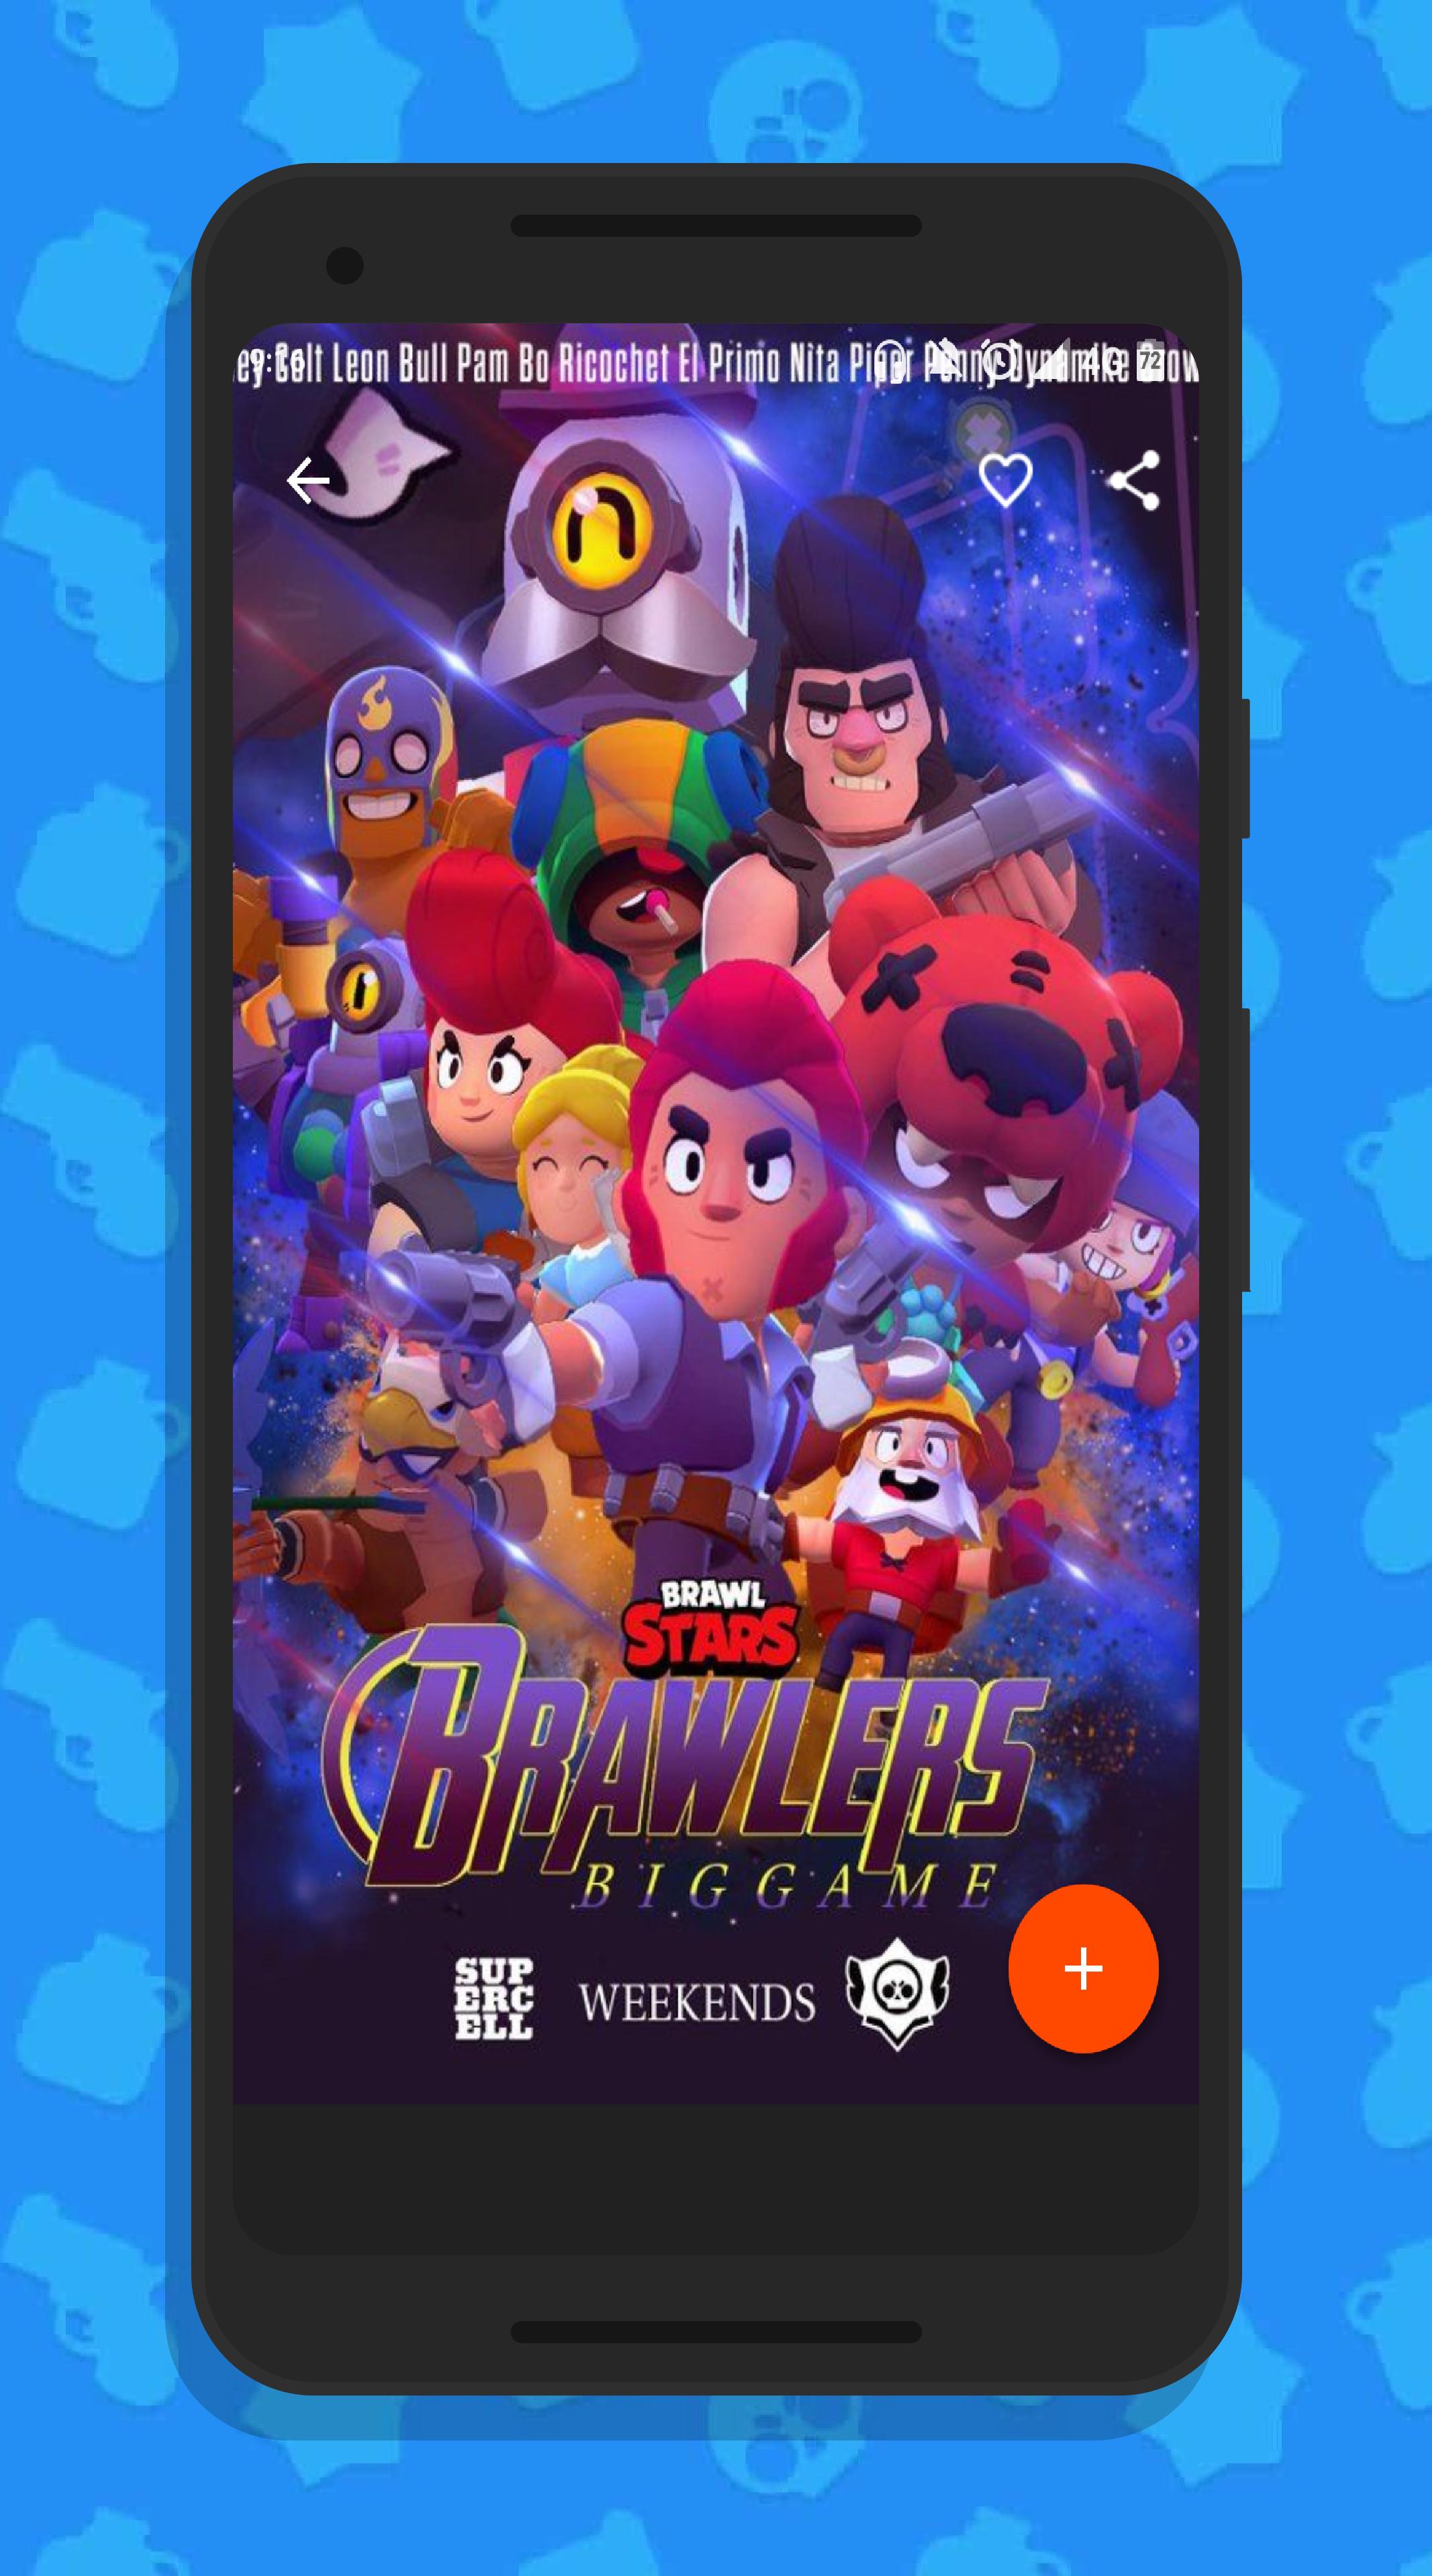 Brawl Wallpapers For Android Apk Download - ricochet brawl stars wallpaper